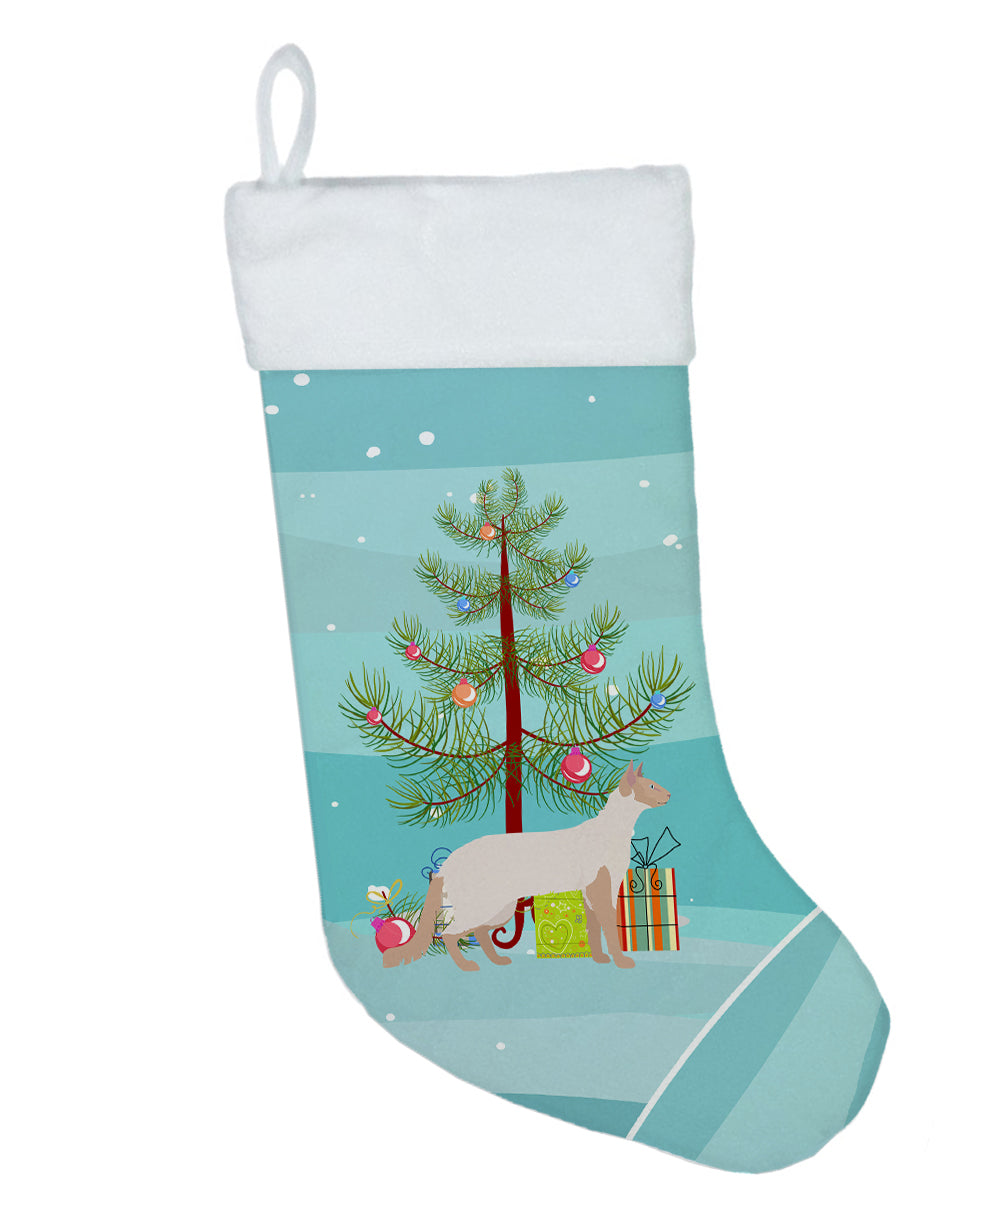 Colorpoint Longhair #2 Cat Merry Christmas Christmas Stocking  the-store.com.